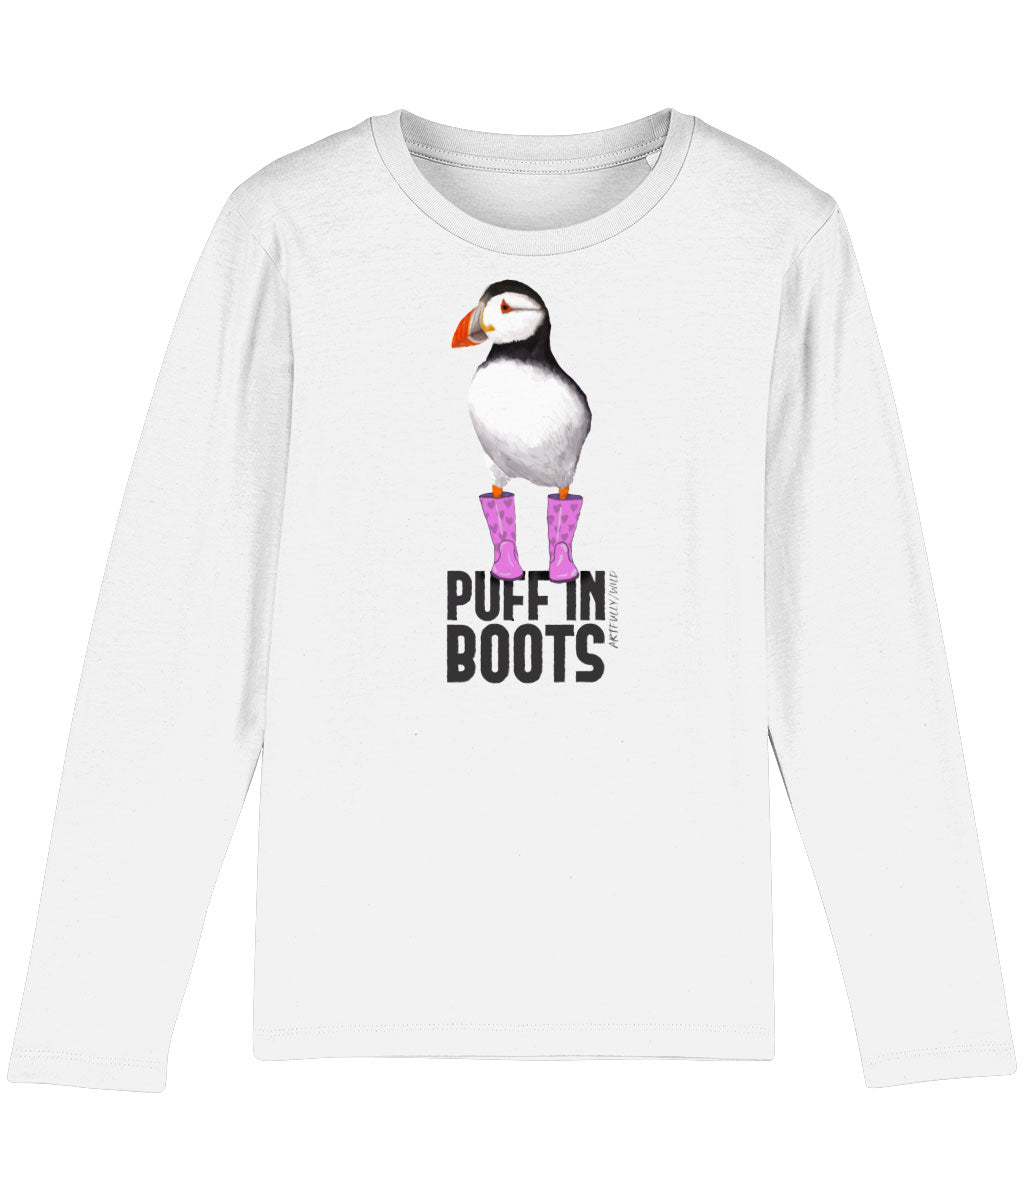 'PUFF IN PINK BOOTS' Print on White Organic Kids Long-Sleeved T-Shirt. Unisex/Girls/Boys. Sustainable Clothing. Original Painted Illustration by Artfully/Wild. Printed with water-based inks.